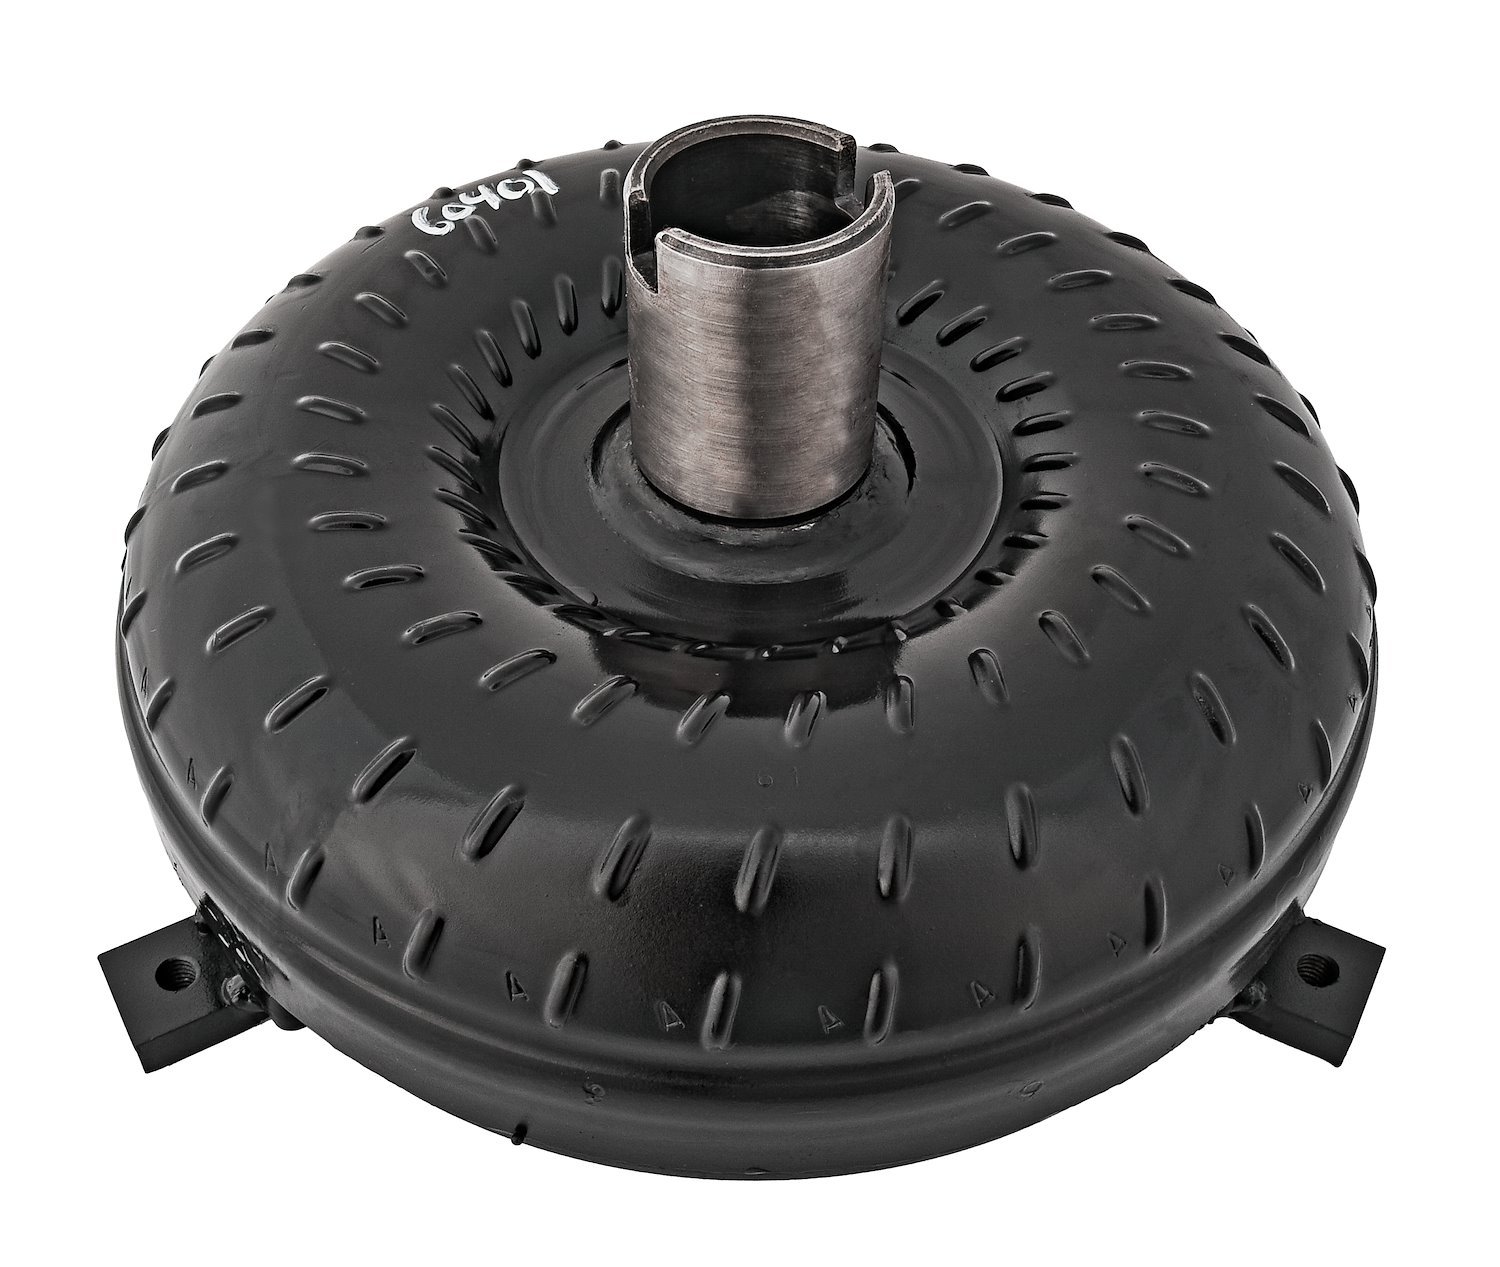 Torque Converter for GM TH350/TH400 [2700-3000 RPM Stall Speed]